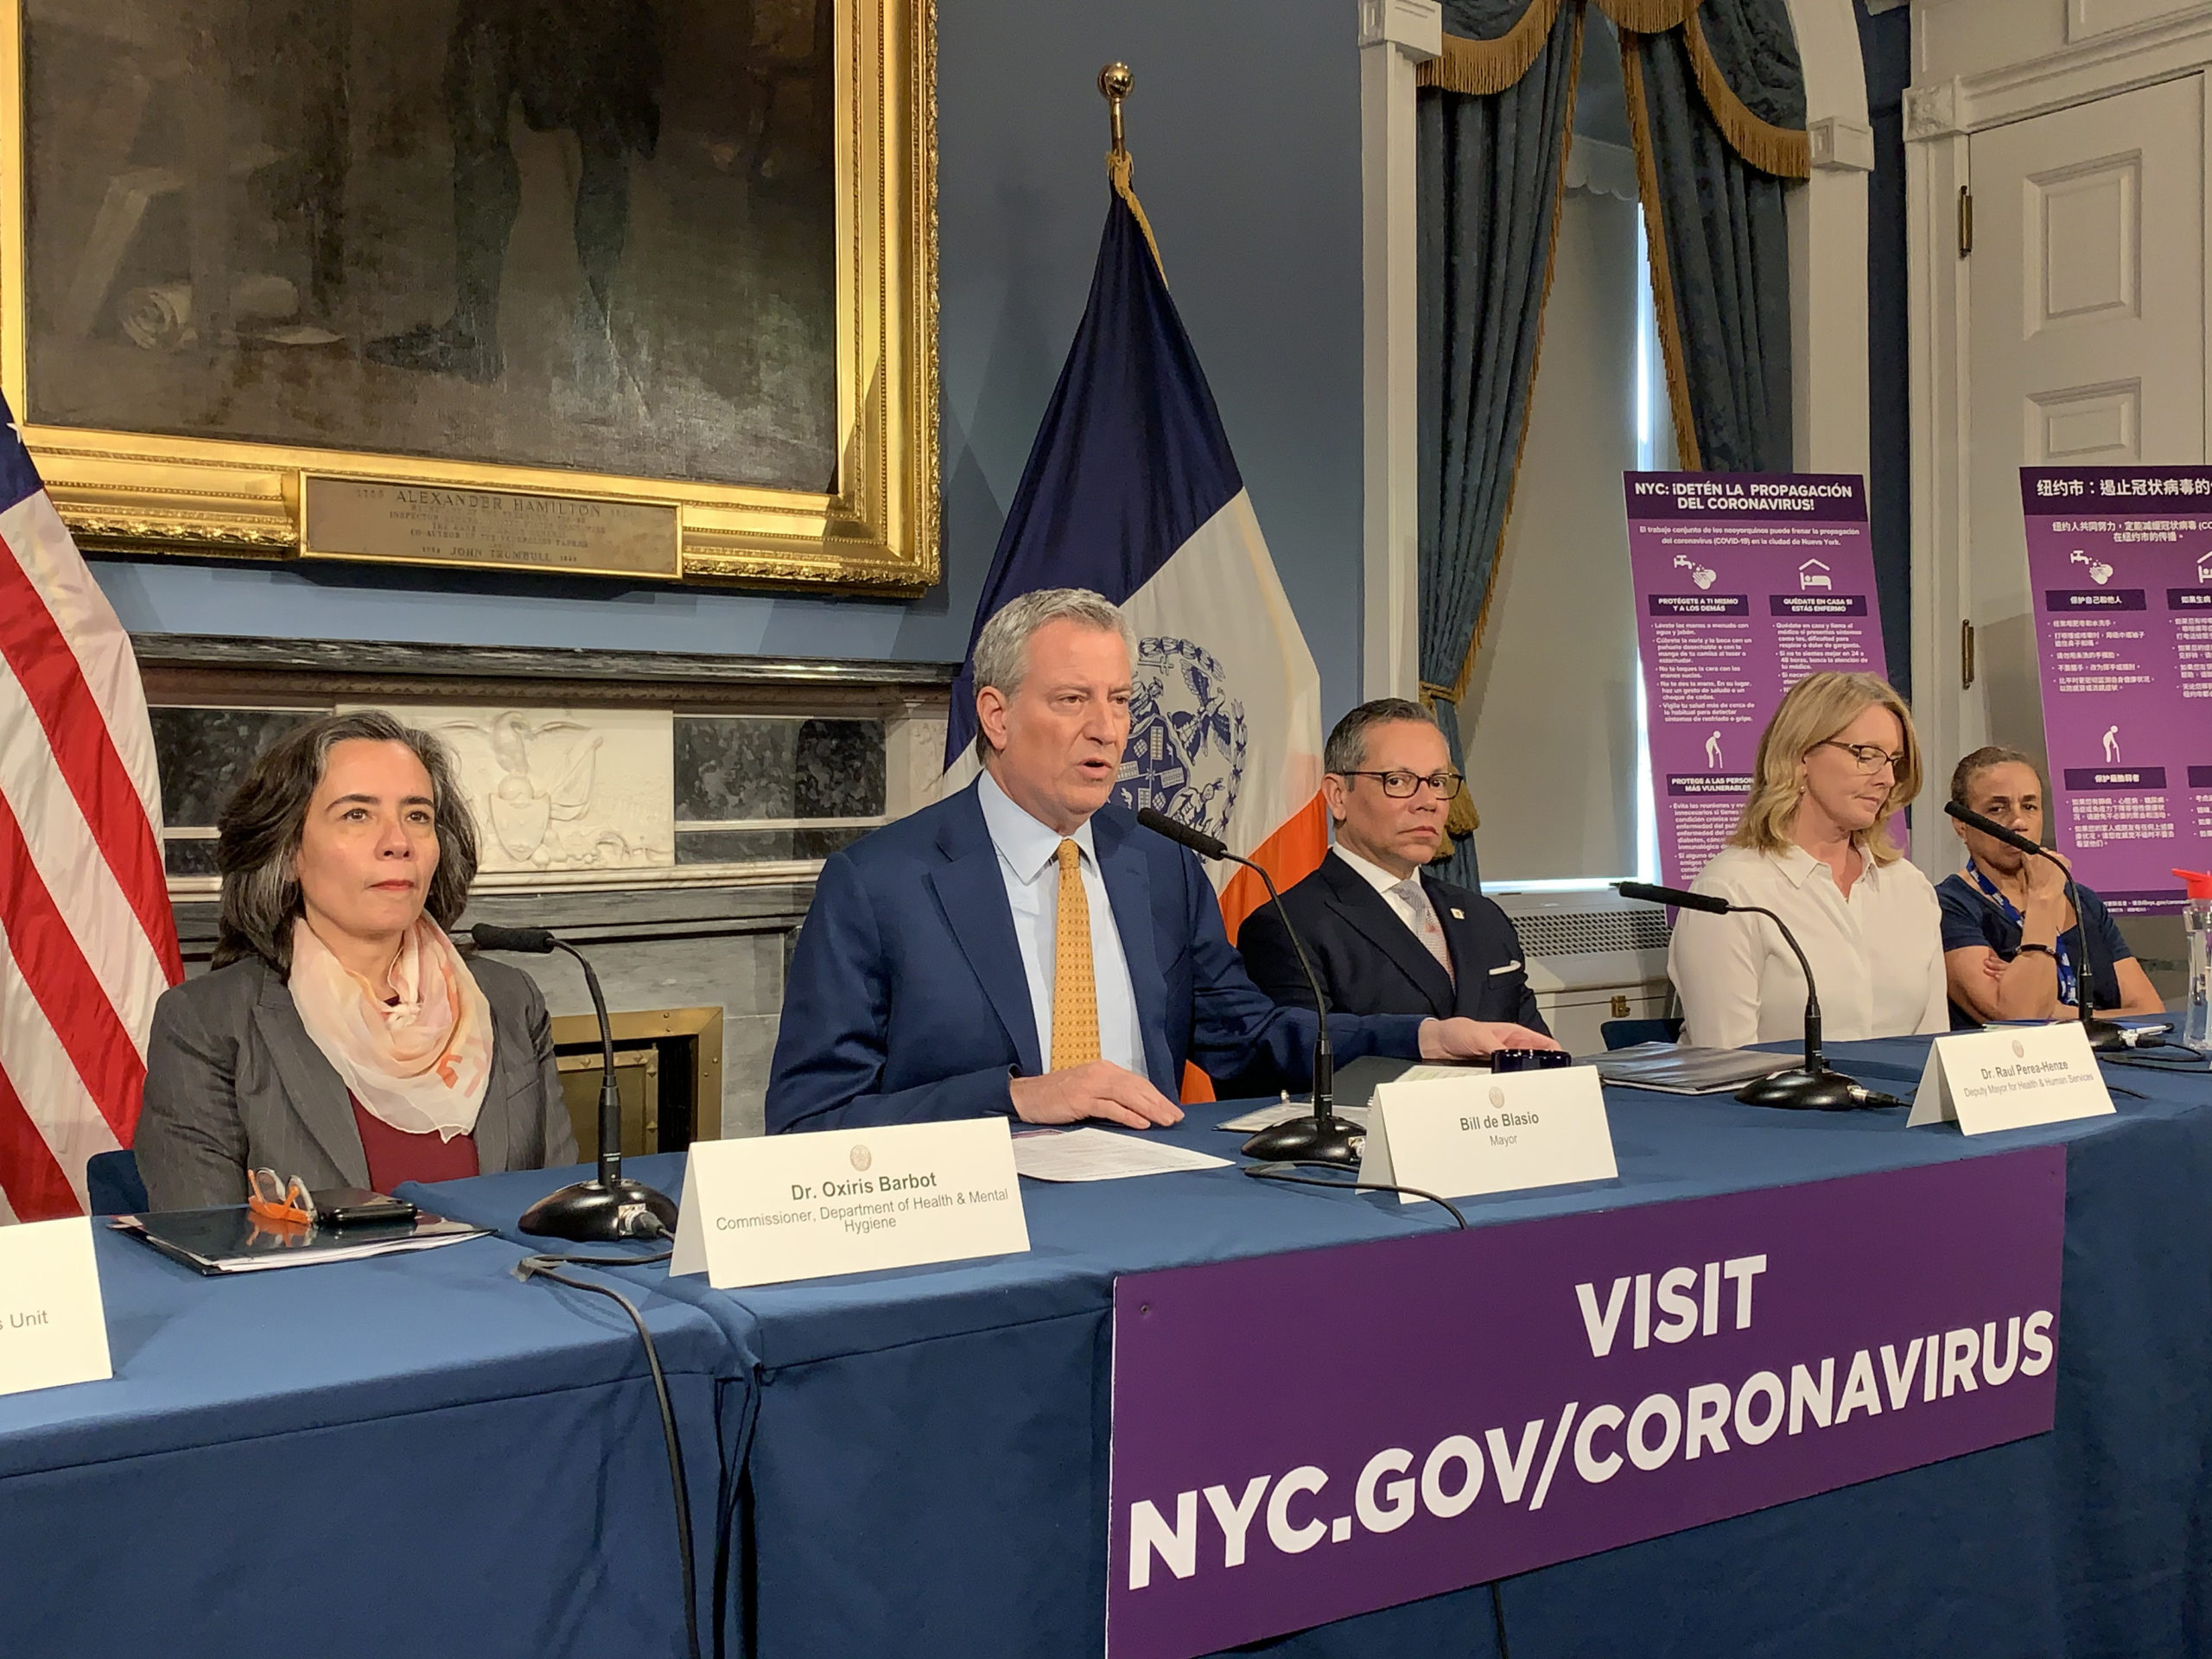 From left: Dr. Oxiris Barbot, Mayor Bill de Blasio, Dr. Raul Perea-Henze, deputy mayor for Health & Human Services, Deanne Criswell, commissioner of Emergency Services, and Bitta Mostofi, commissioner of the Mayor’s Office of Immigrant Affairs. Photo: Mary Frost/Brooklyn Eagle